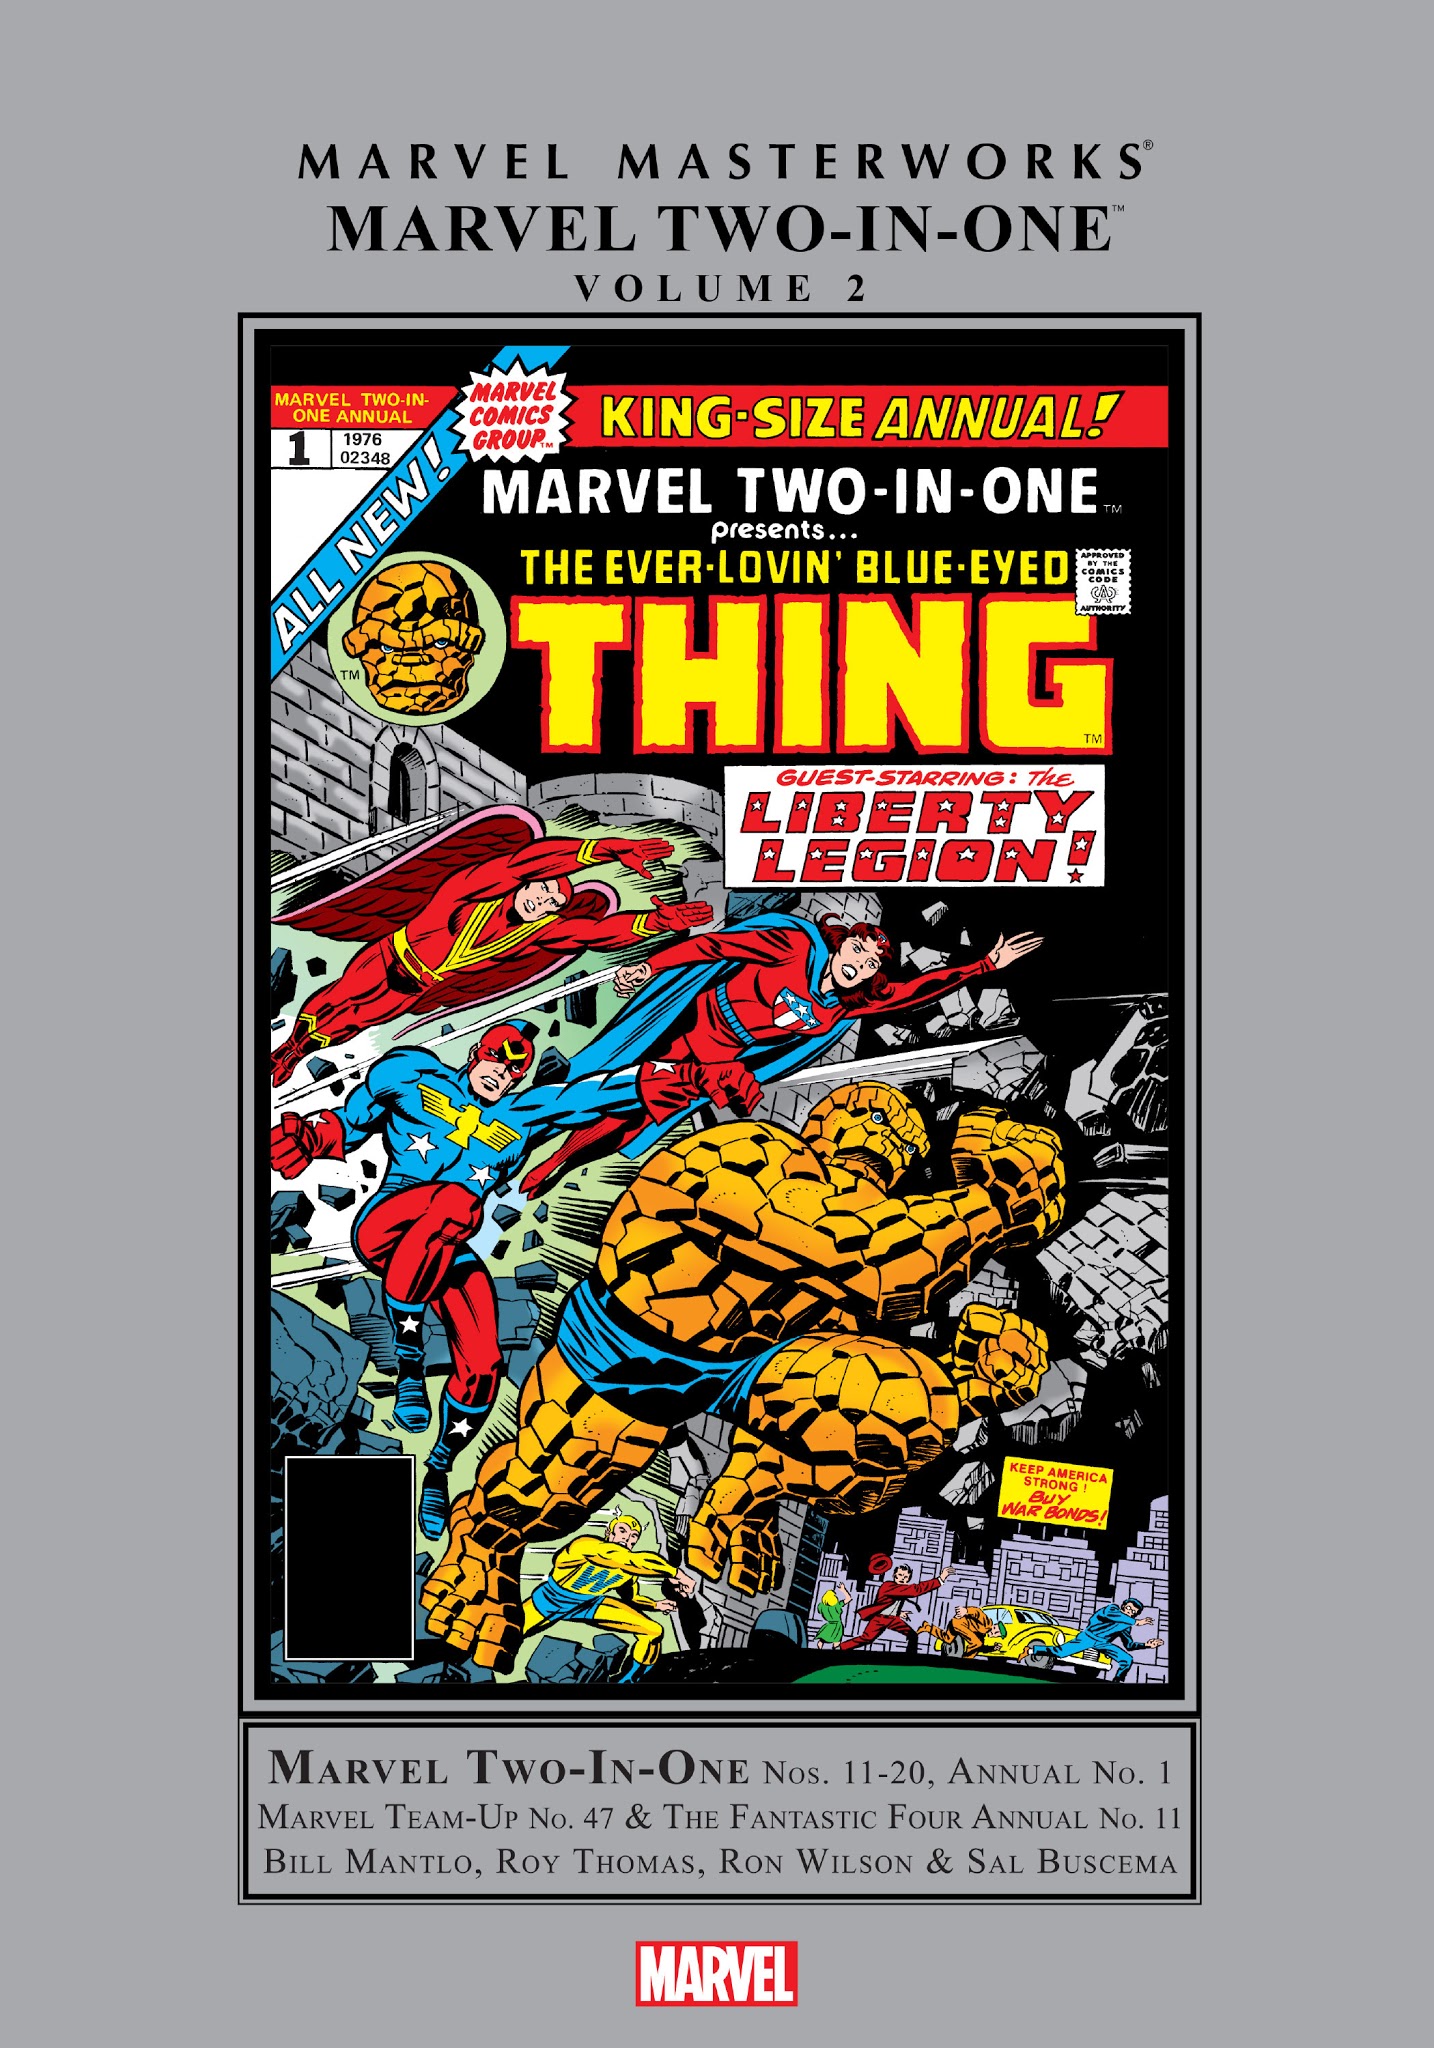 Read online Marvel Masterworks: Marvel Two-In-One comic -  Issue # TPB 2 - 1